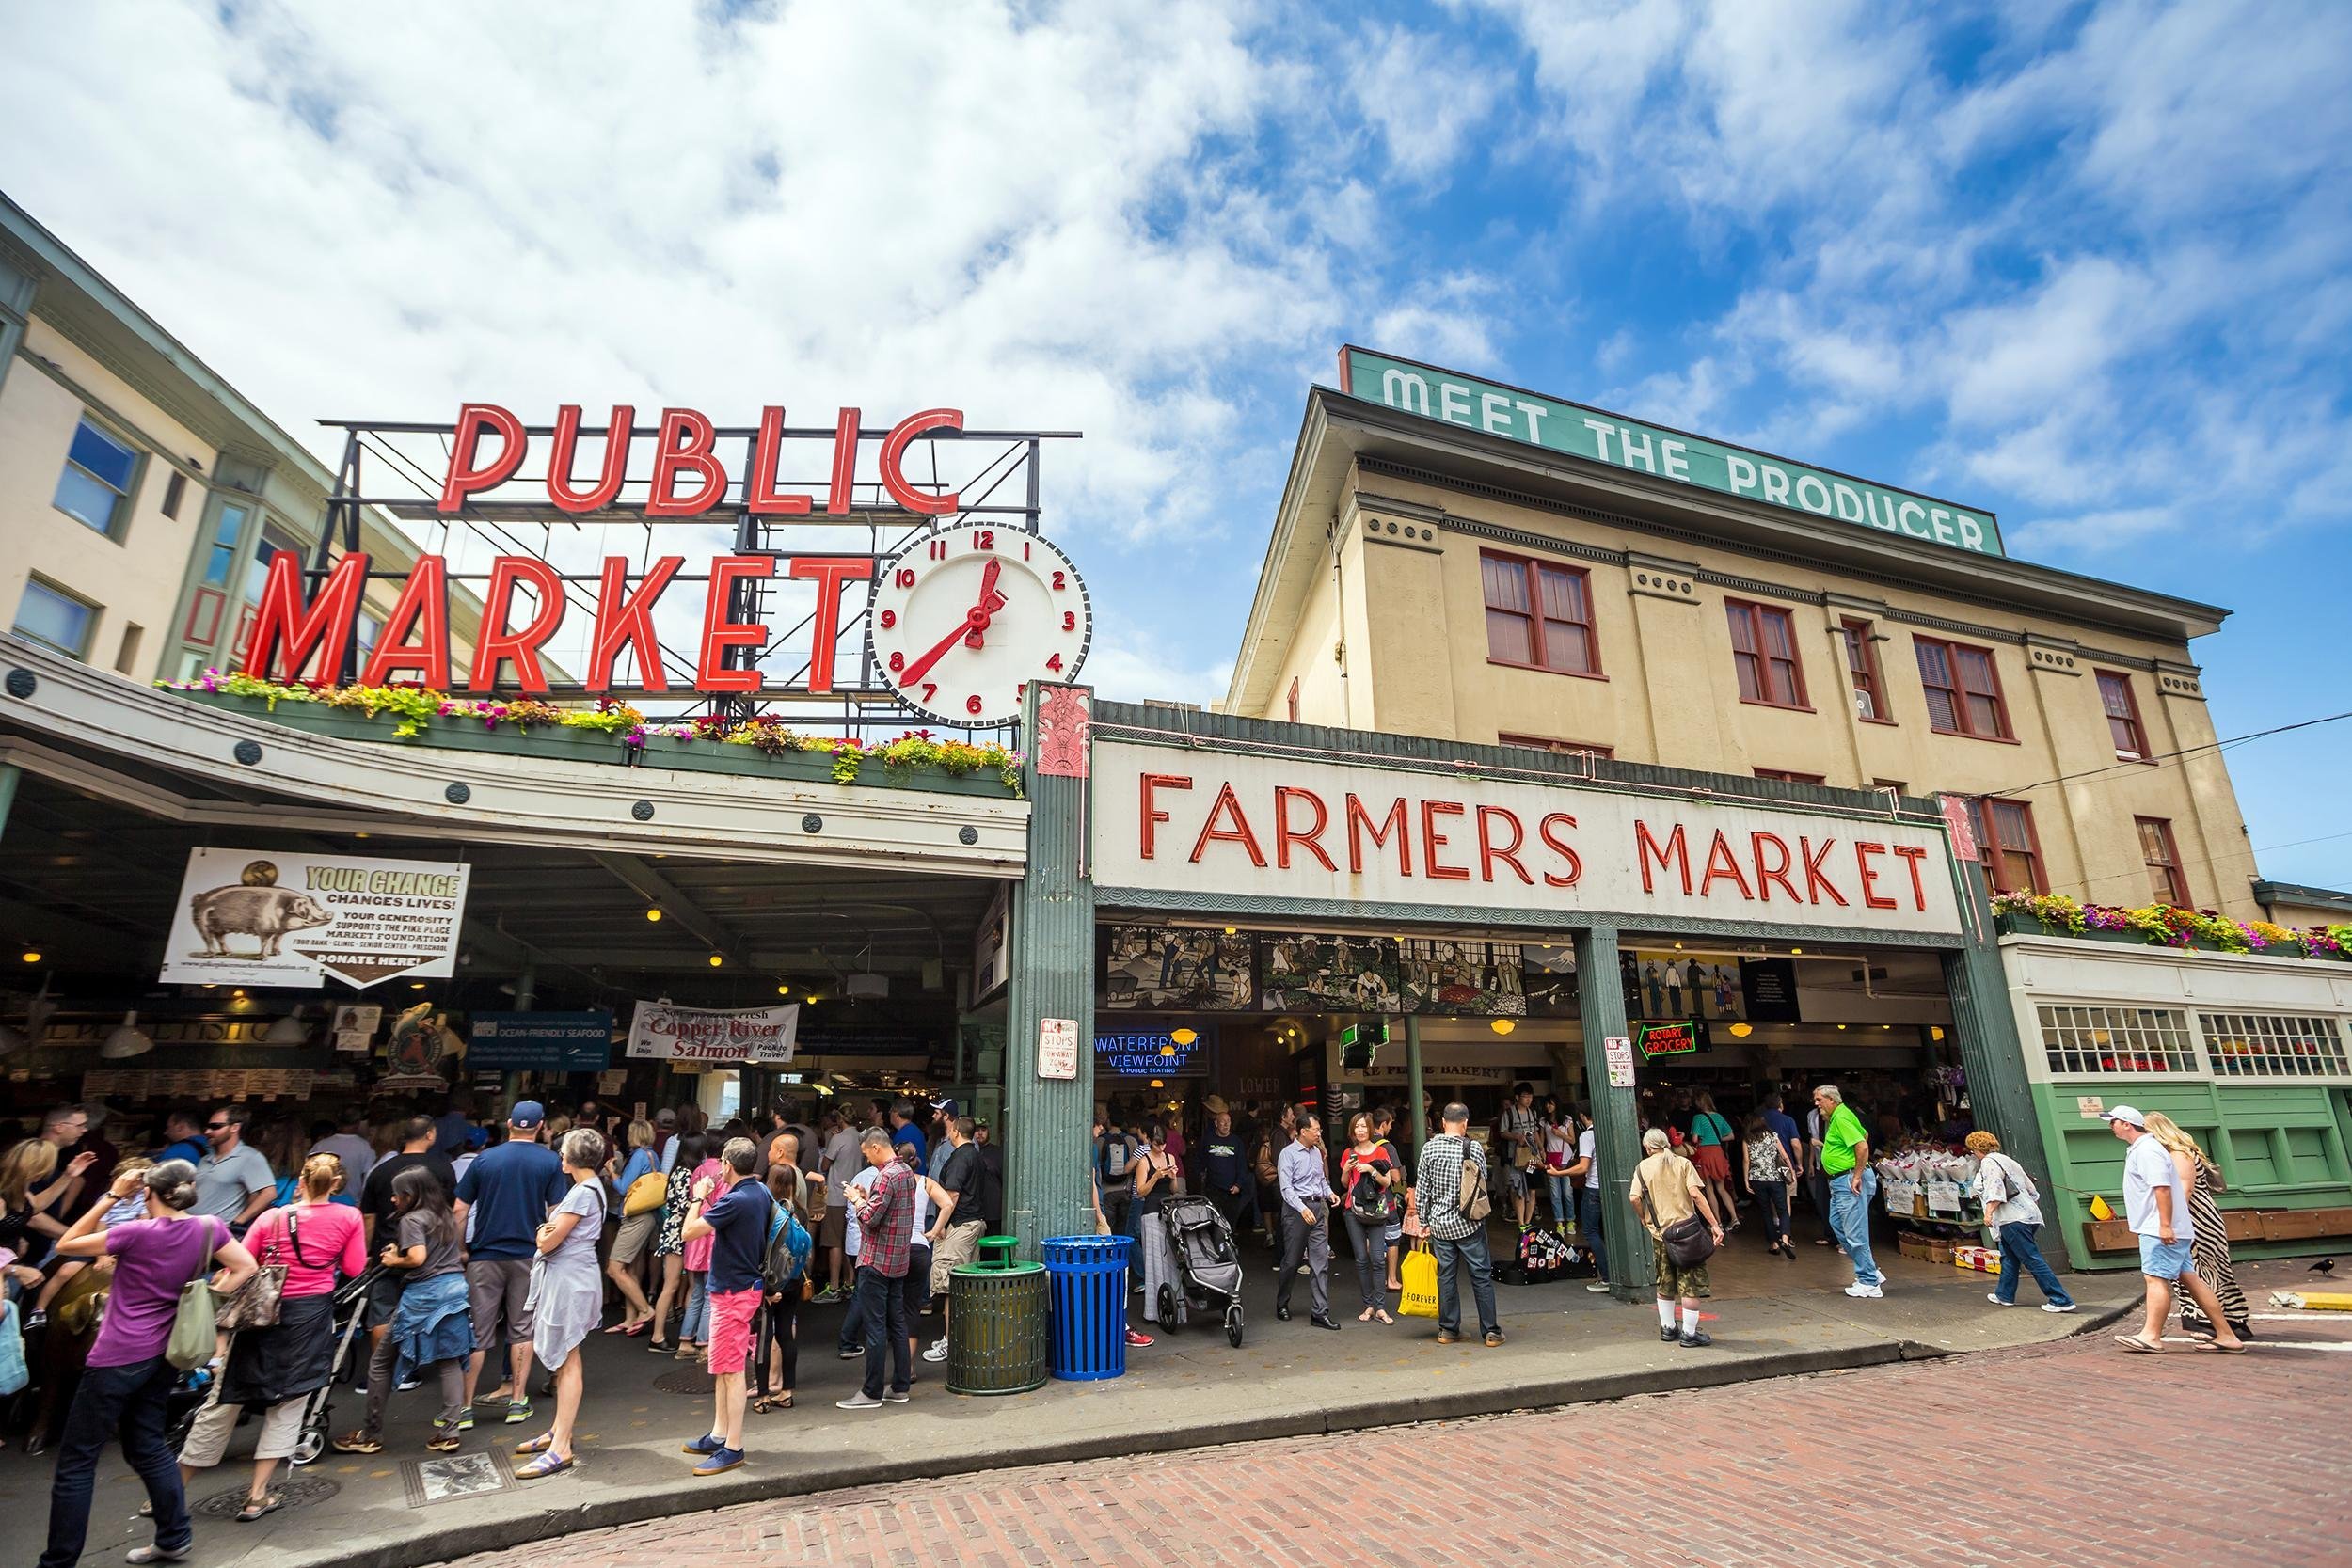 <p><a href="https://pikeplacemarket.org/">Pike Place Market </a>in Seattle is free to enter, but you likely won't leave without buying a nosh. This is one of the oldest farmers' markets in the country and spans 9 acres. Watch fish fly at the Pike Place Fish Market, sip a cup of coffee at the original Starbucks or maybe a pint at Pike Brewing Co., or have a sweet bite at the Daily Dozen Doughnut Co.</p>